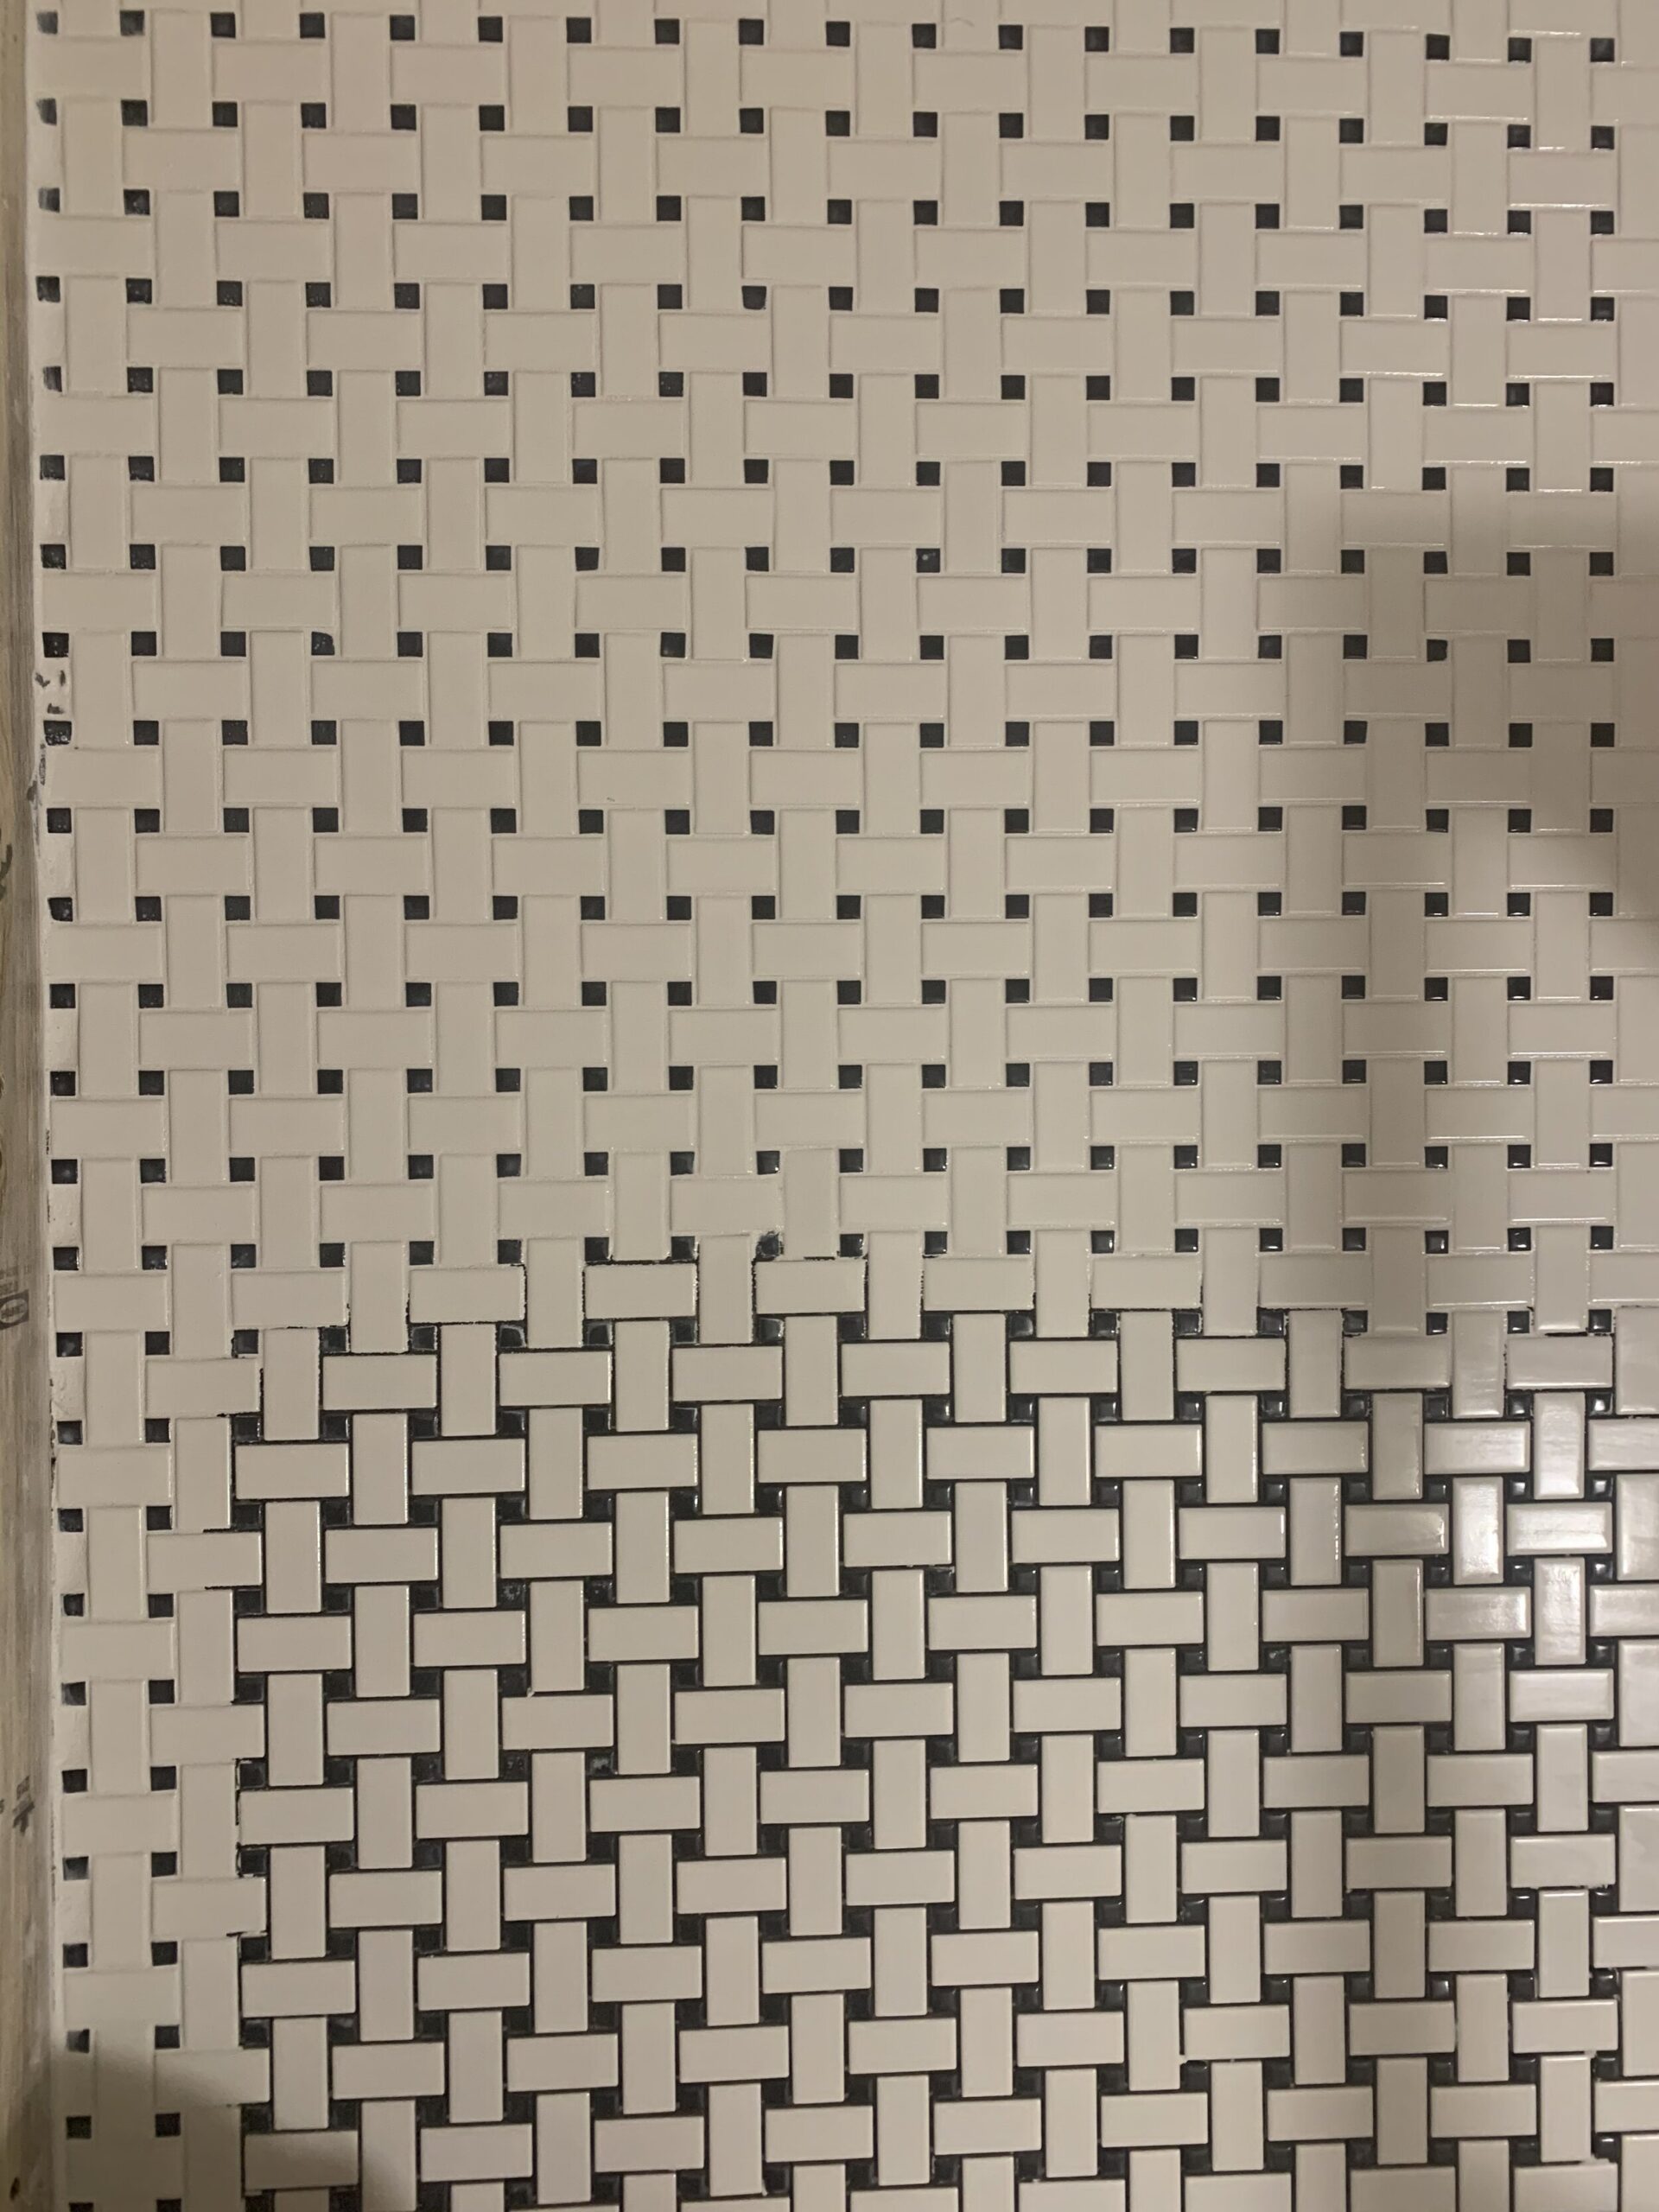 Black and white basketweave ceramic tile with grout half finished